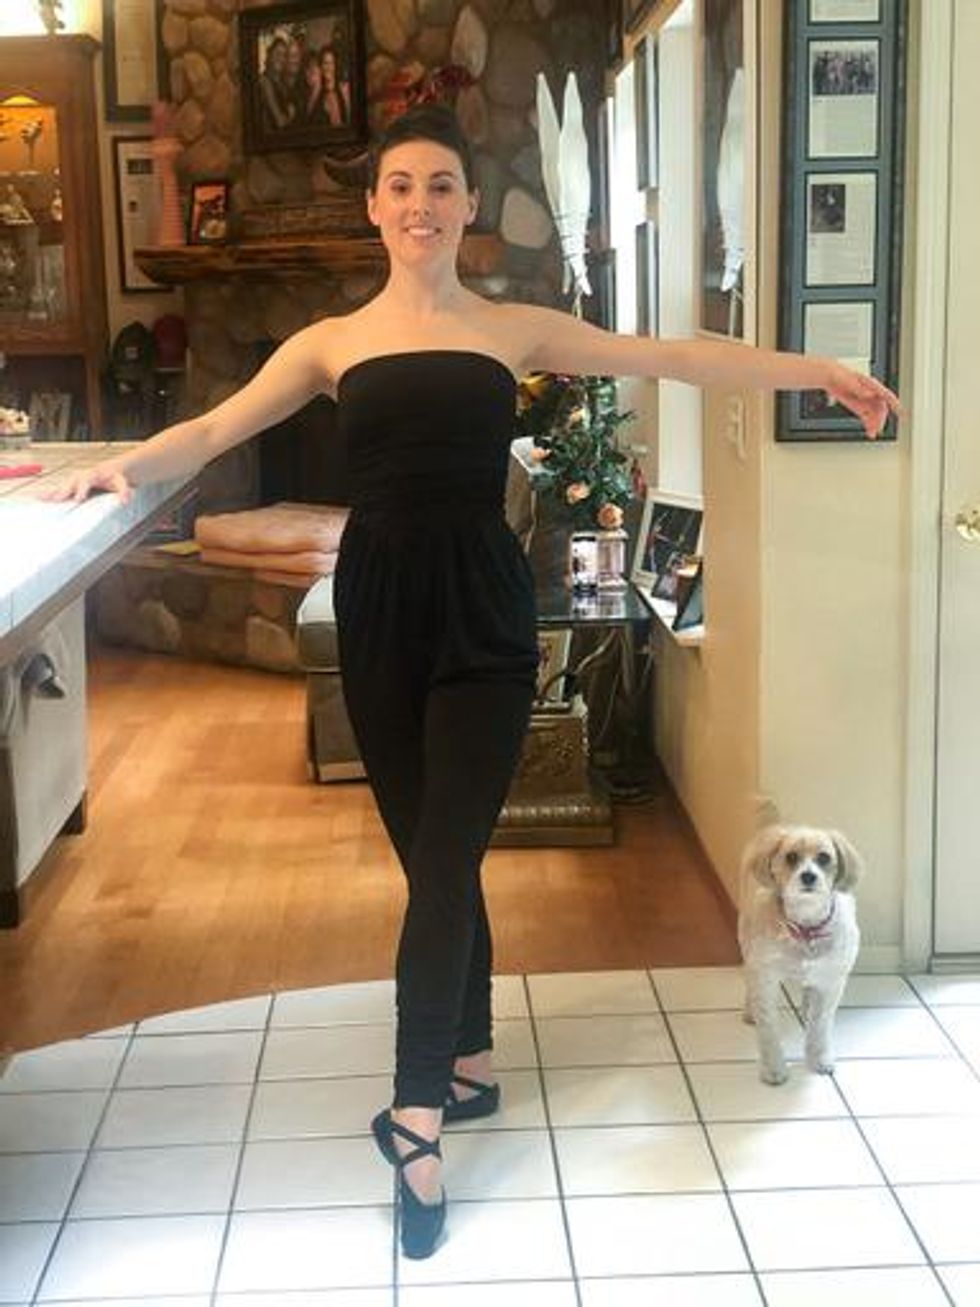 Peck, a woman with brown hair, stands in a tendu ballet position with one foot pointed in front of her on the floor. One hand holds her countertop for support and the other is to the side of her in second position. She wears a black jumpsuit and black ballet slippers. She stands on white tile next to a white dog. A brick fireplace is behind her.